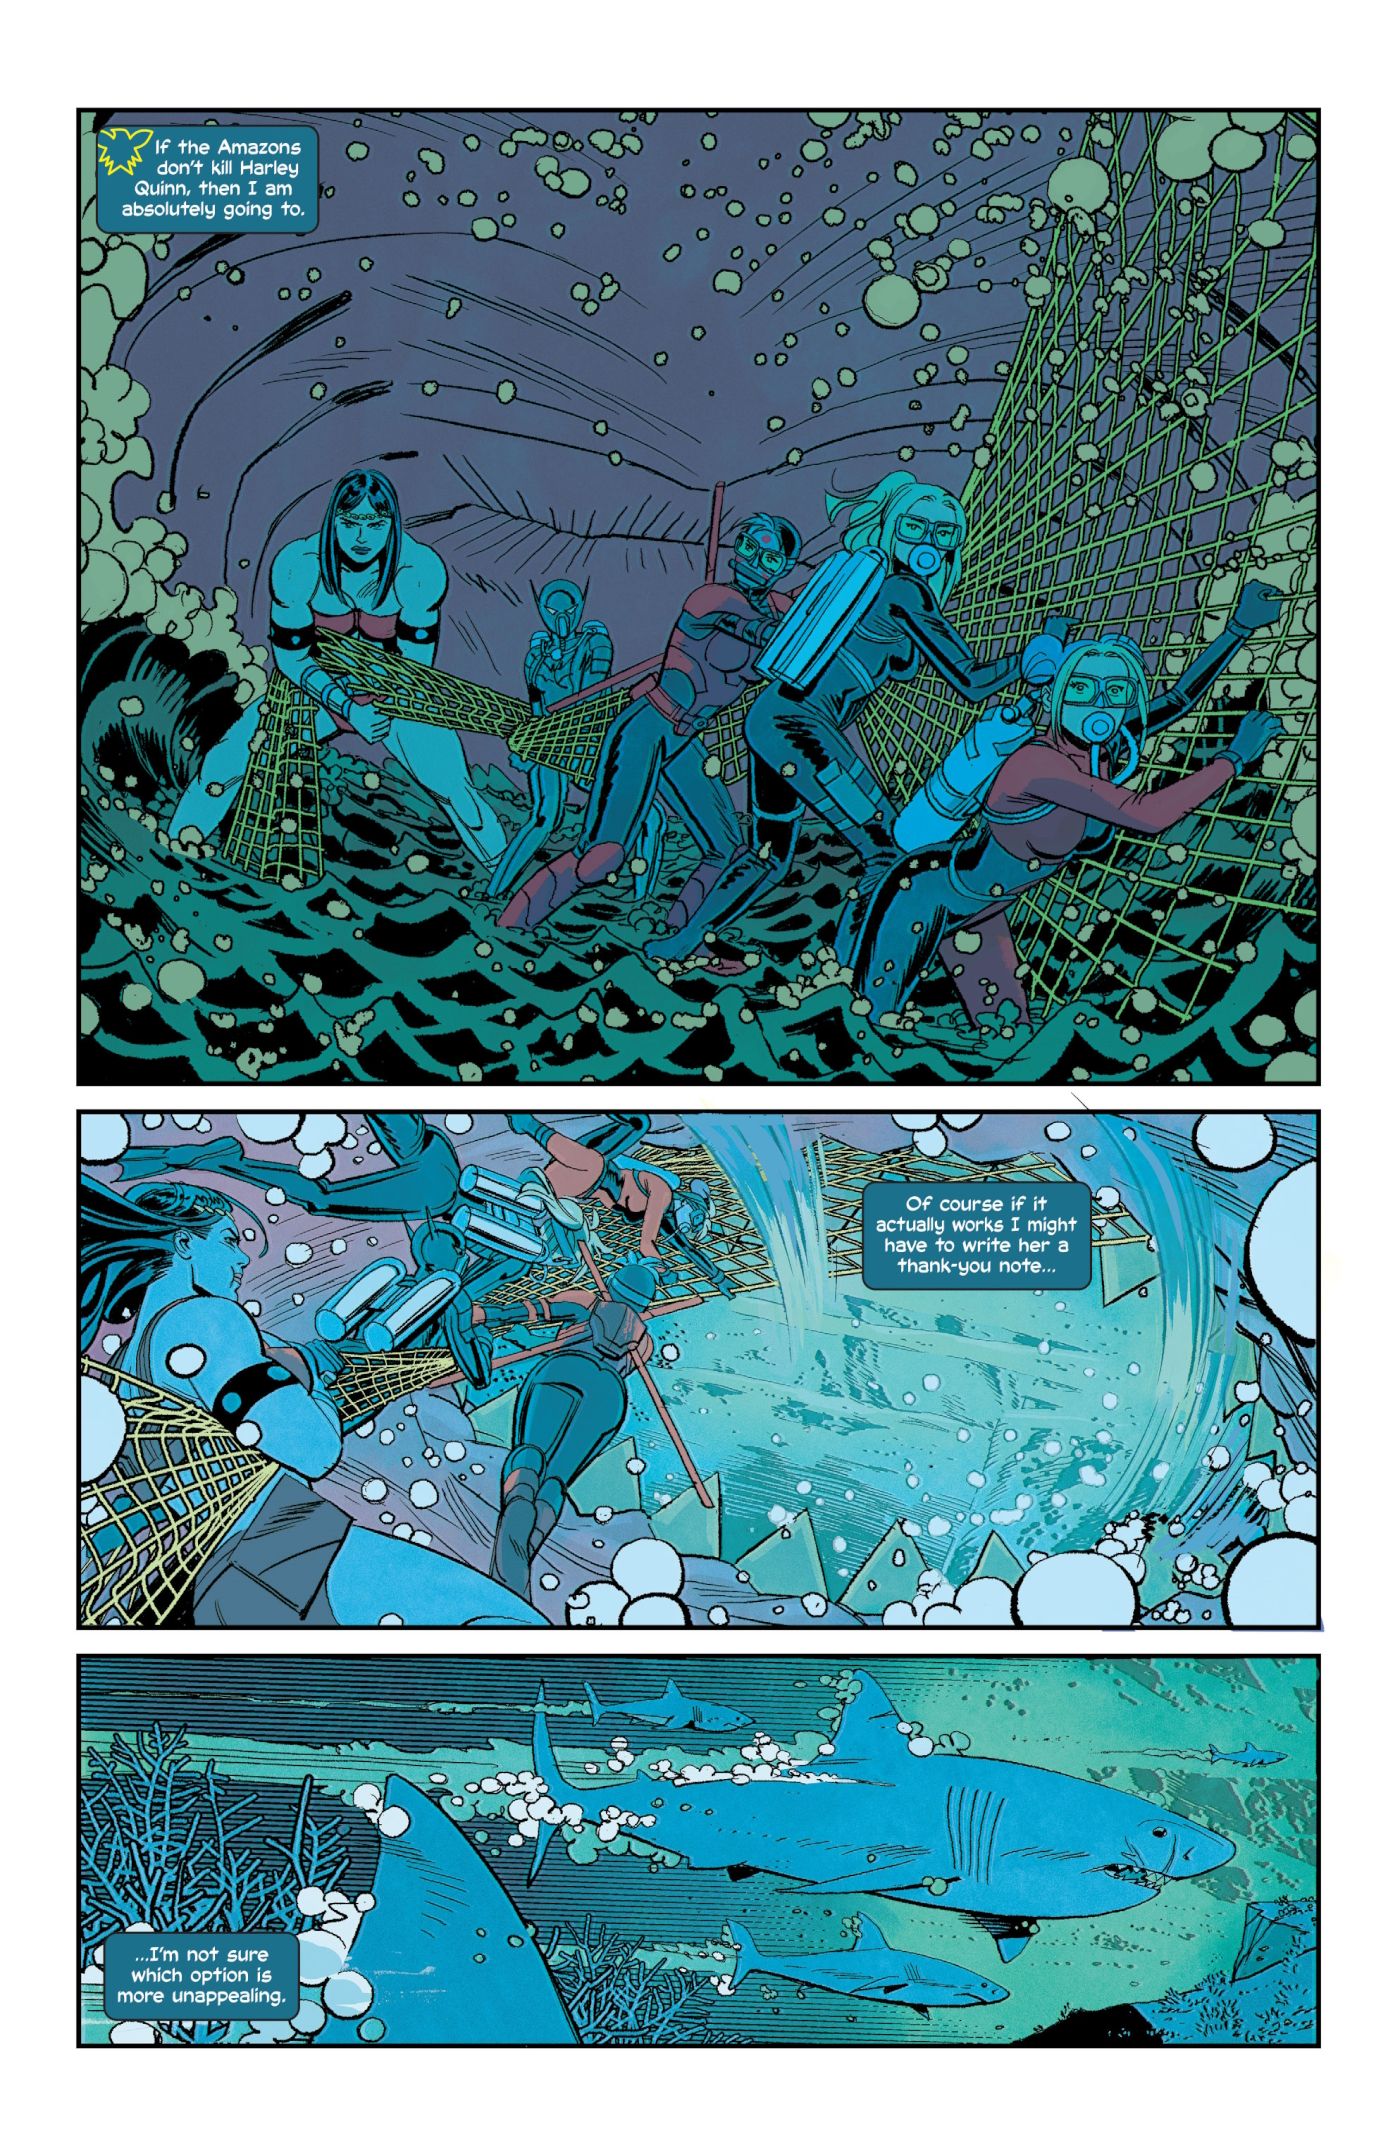 Birds of Prey #3, the team smuggle themselves into Themyscira in the mouth of a megaladon shark